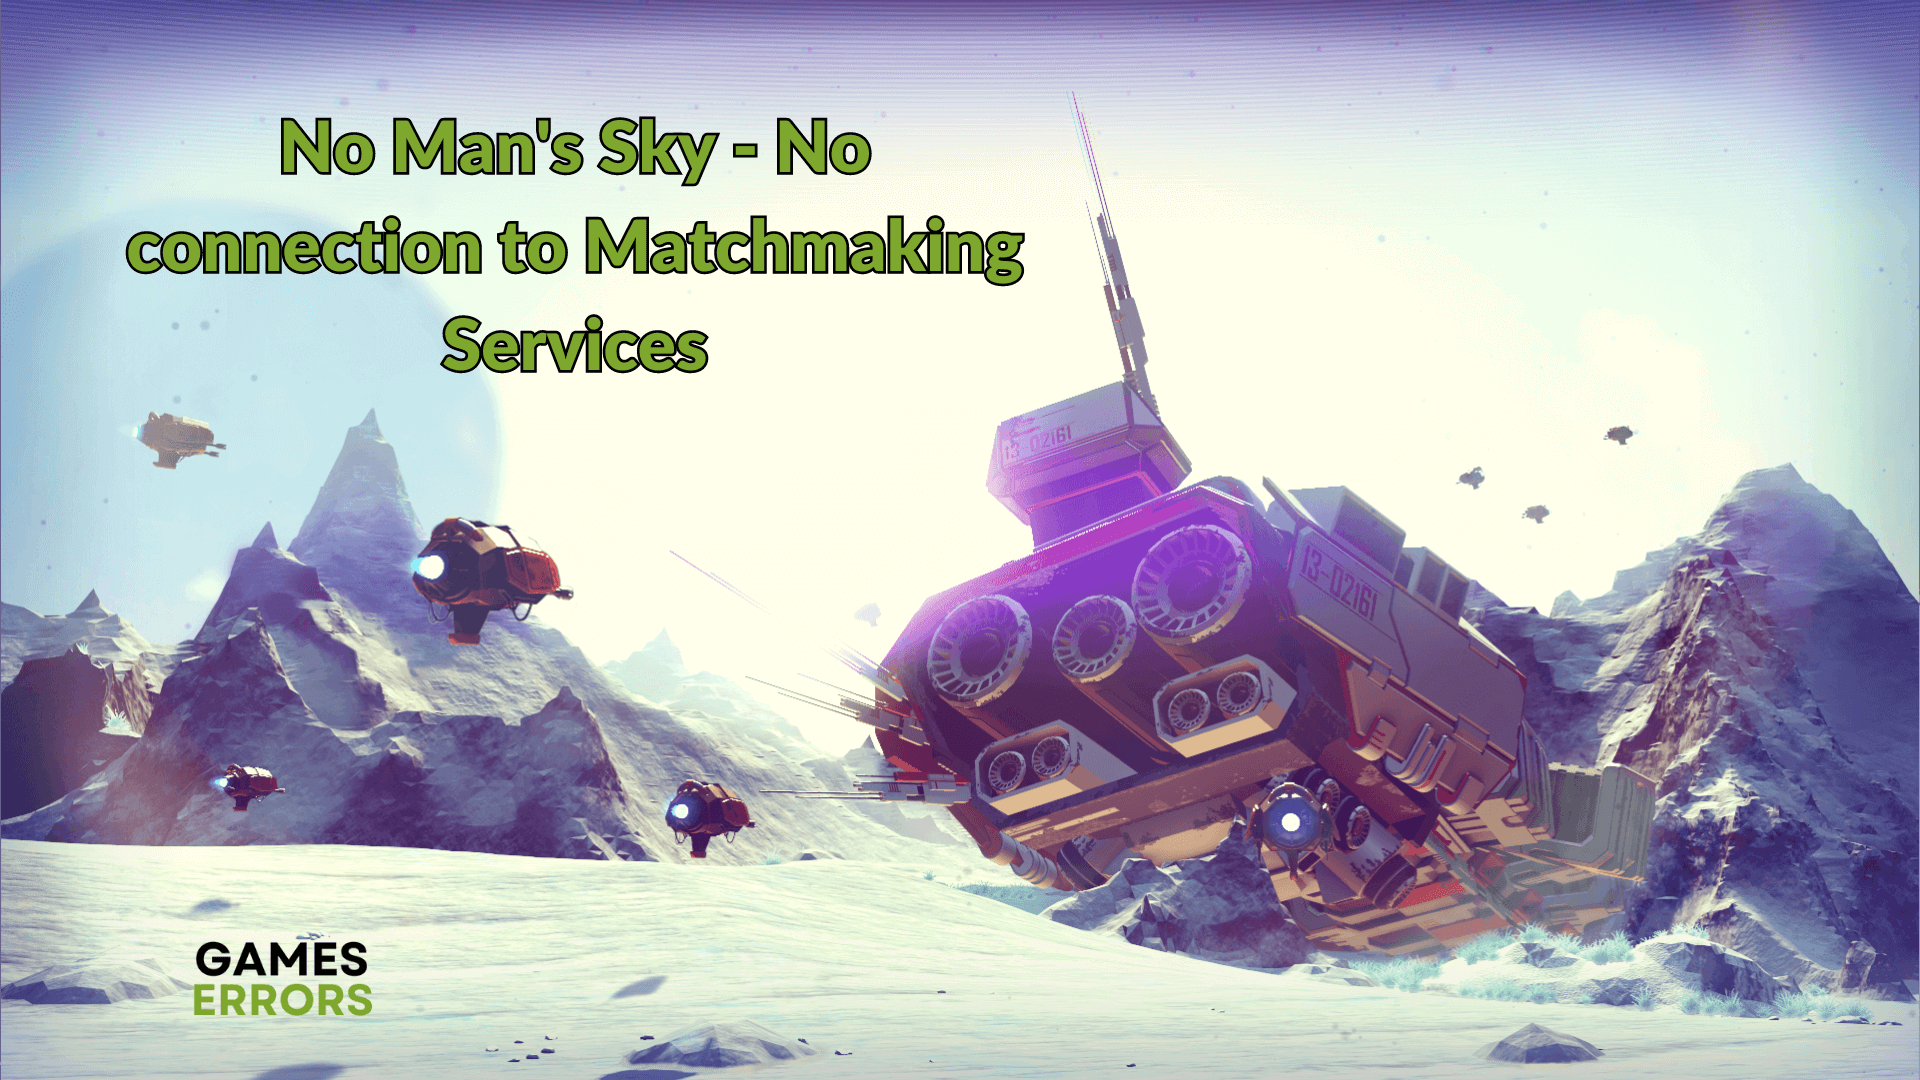 No Man's Sky - No connection to Matchmaking Services